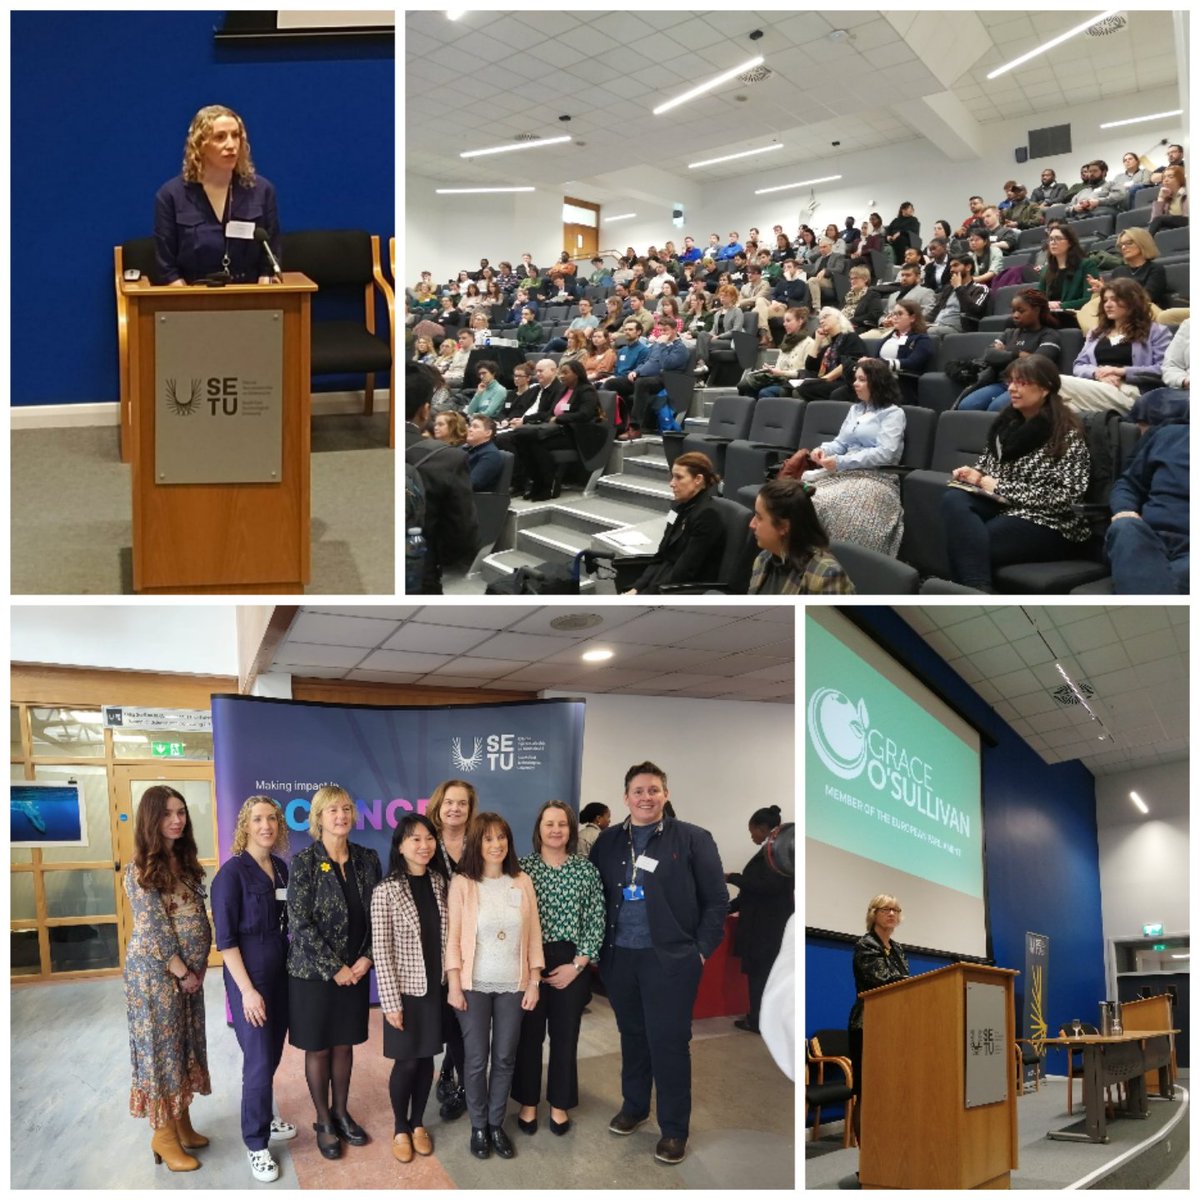 Delighted to be speaking at the opening event of @ESAI_Environ #environ2024. A fantastic line-up of speakers this morning with Tara Higgins @EPAResearchNews & @GraceOSllvn. Looking forward to seeing all the presentations today.